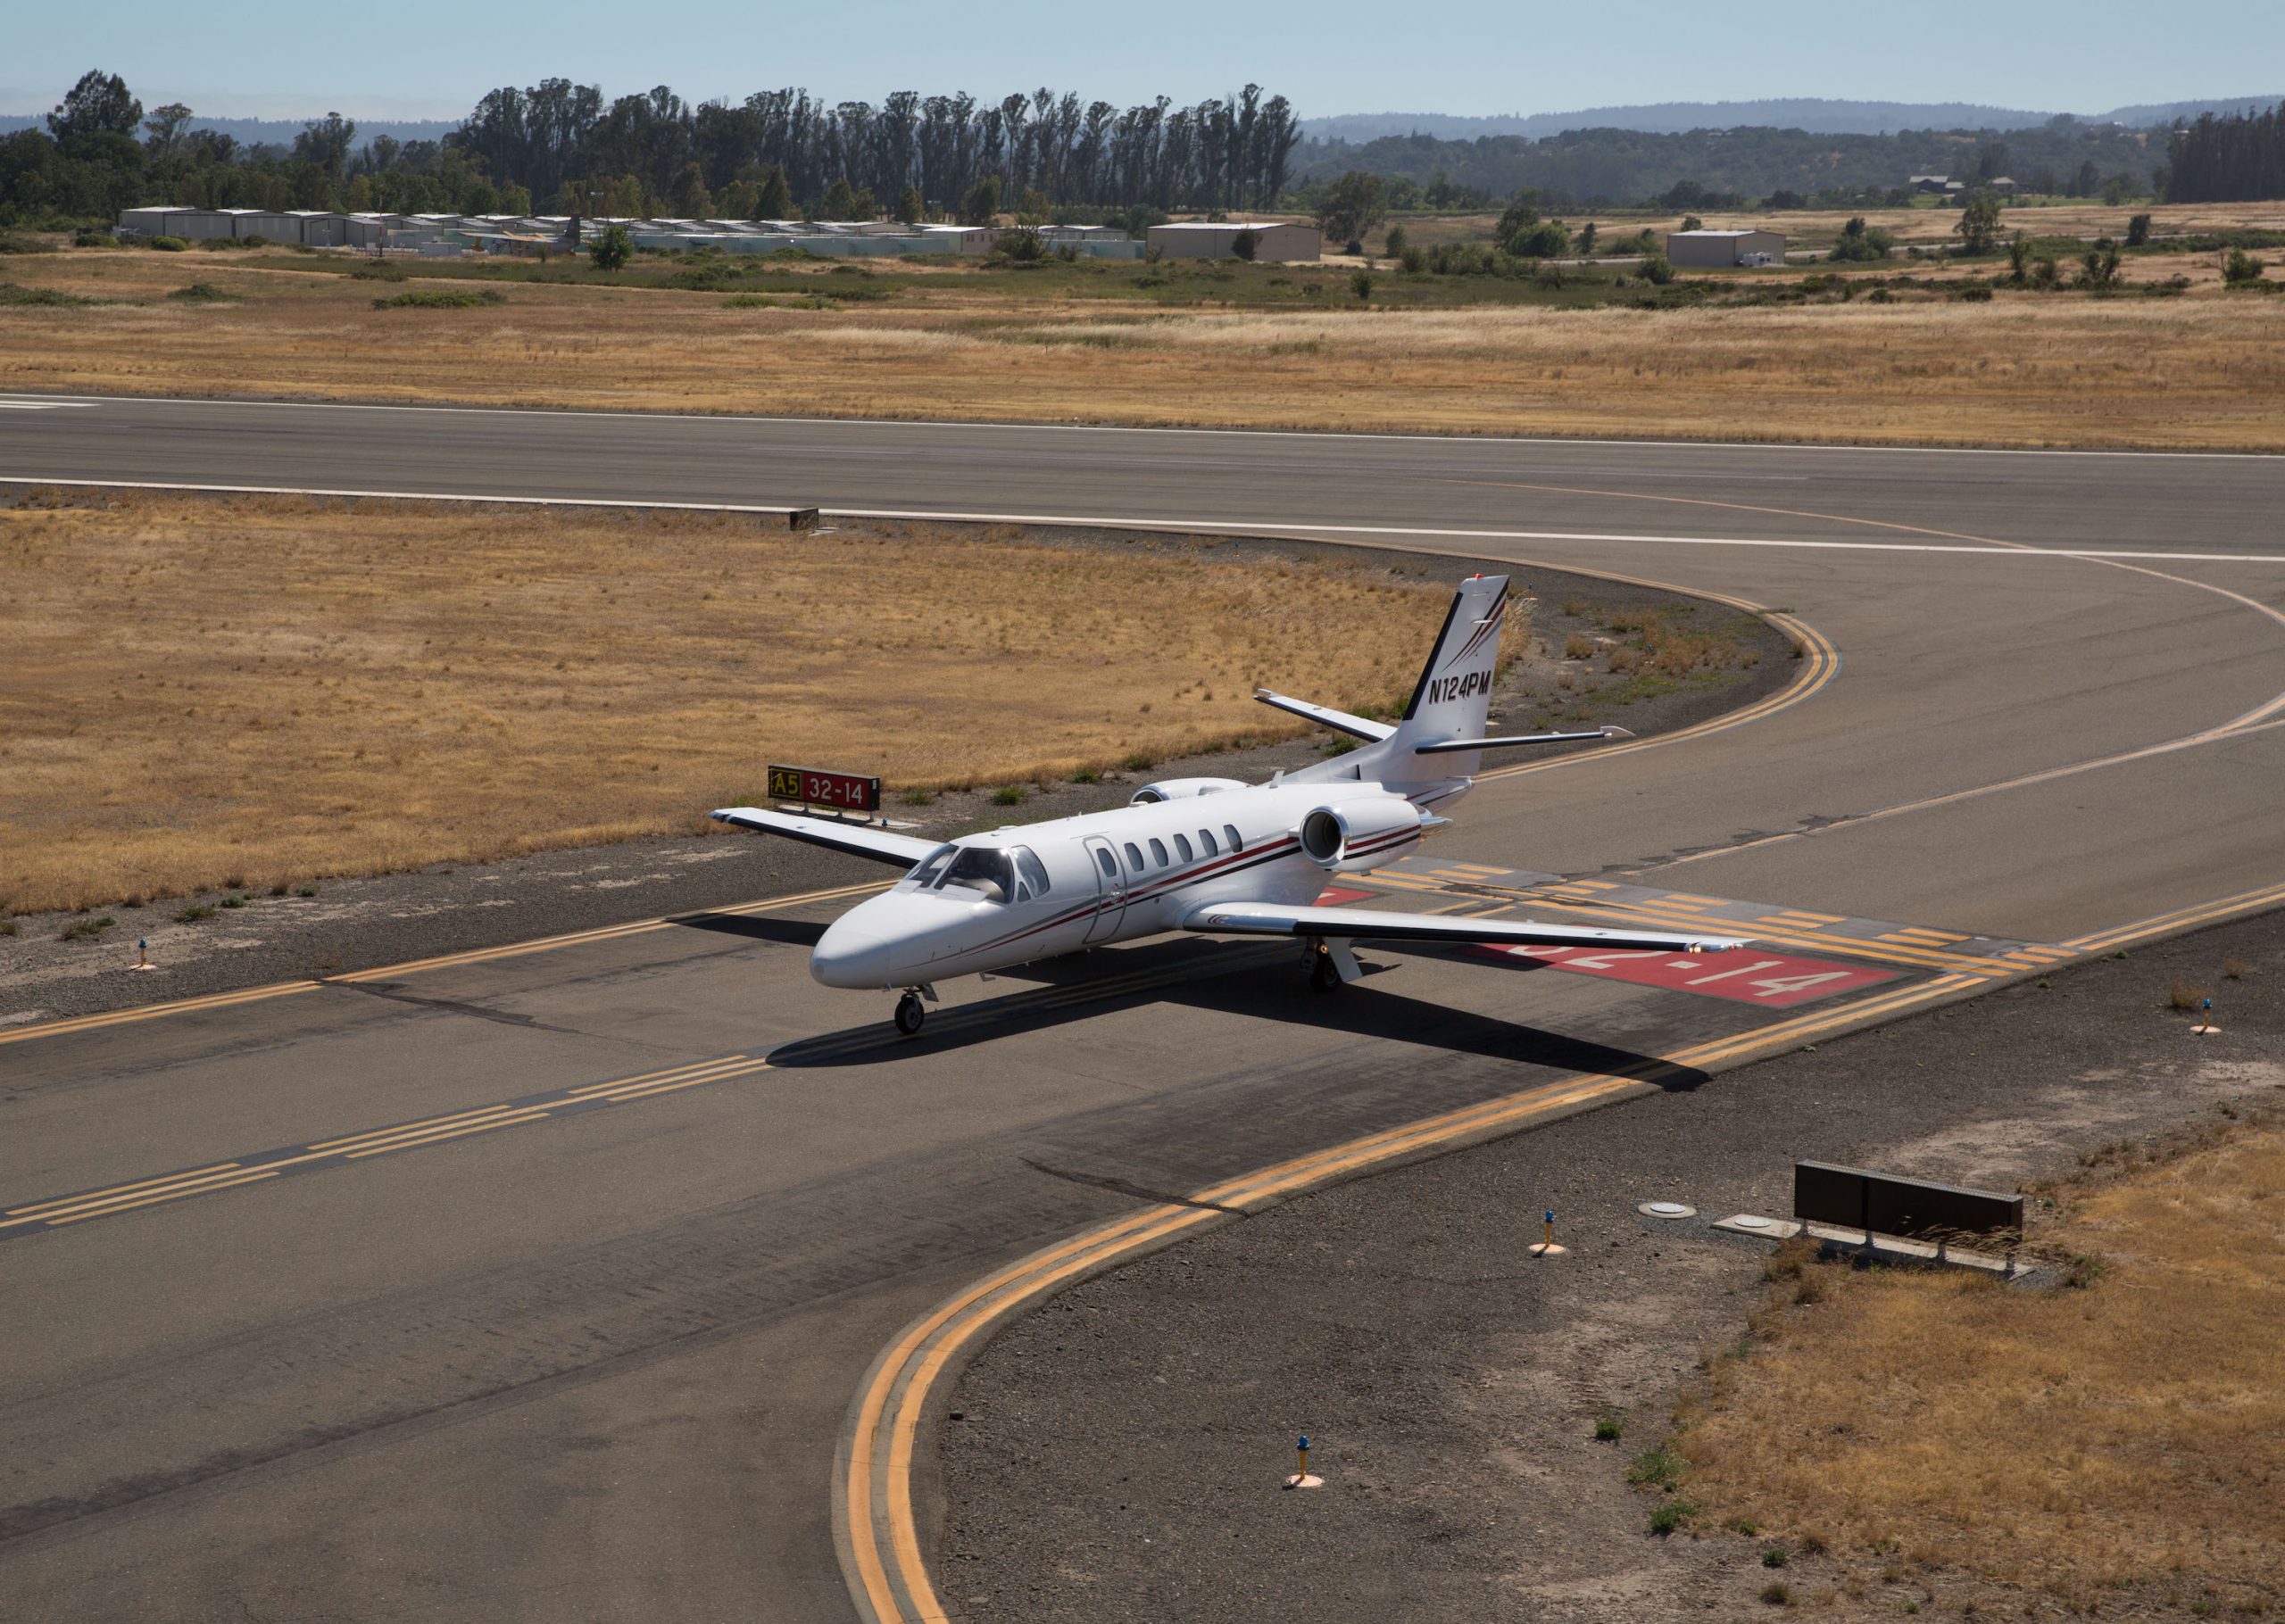 A Cessna Citation jet airplane is viewed at Charles M. Schulz Sonoma County Airport